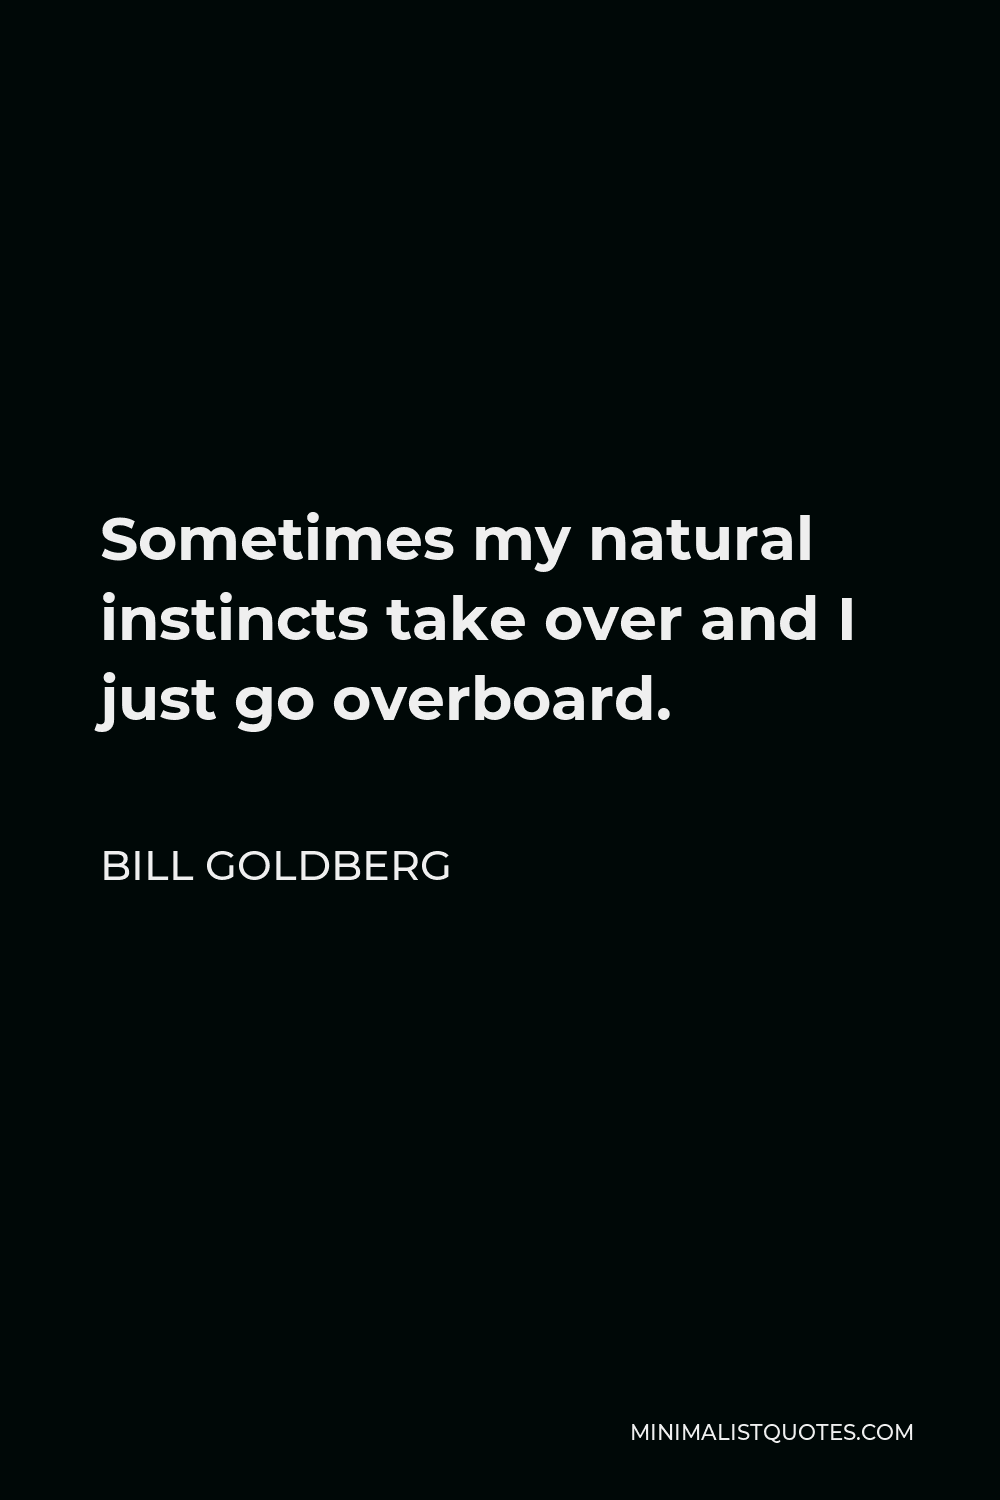 Bill Goldberg Quote - Sometimes my natural instincts take over and I just go overboard.